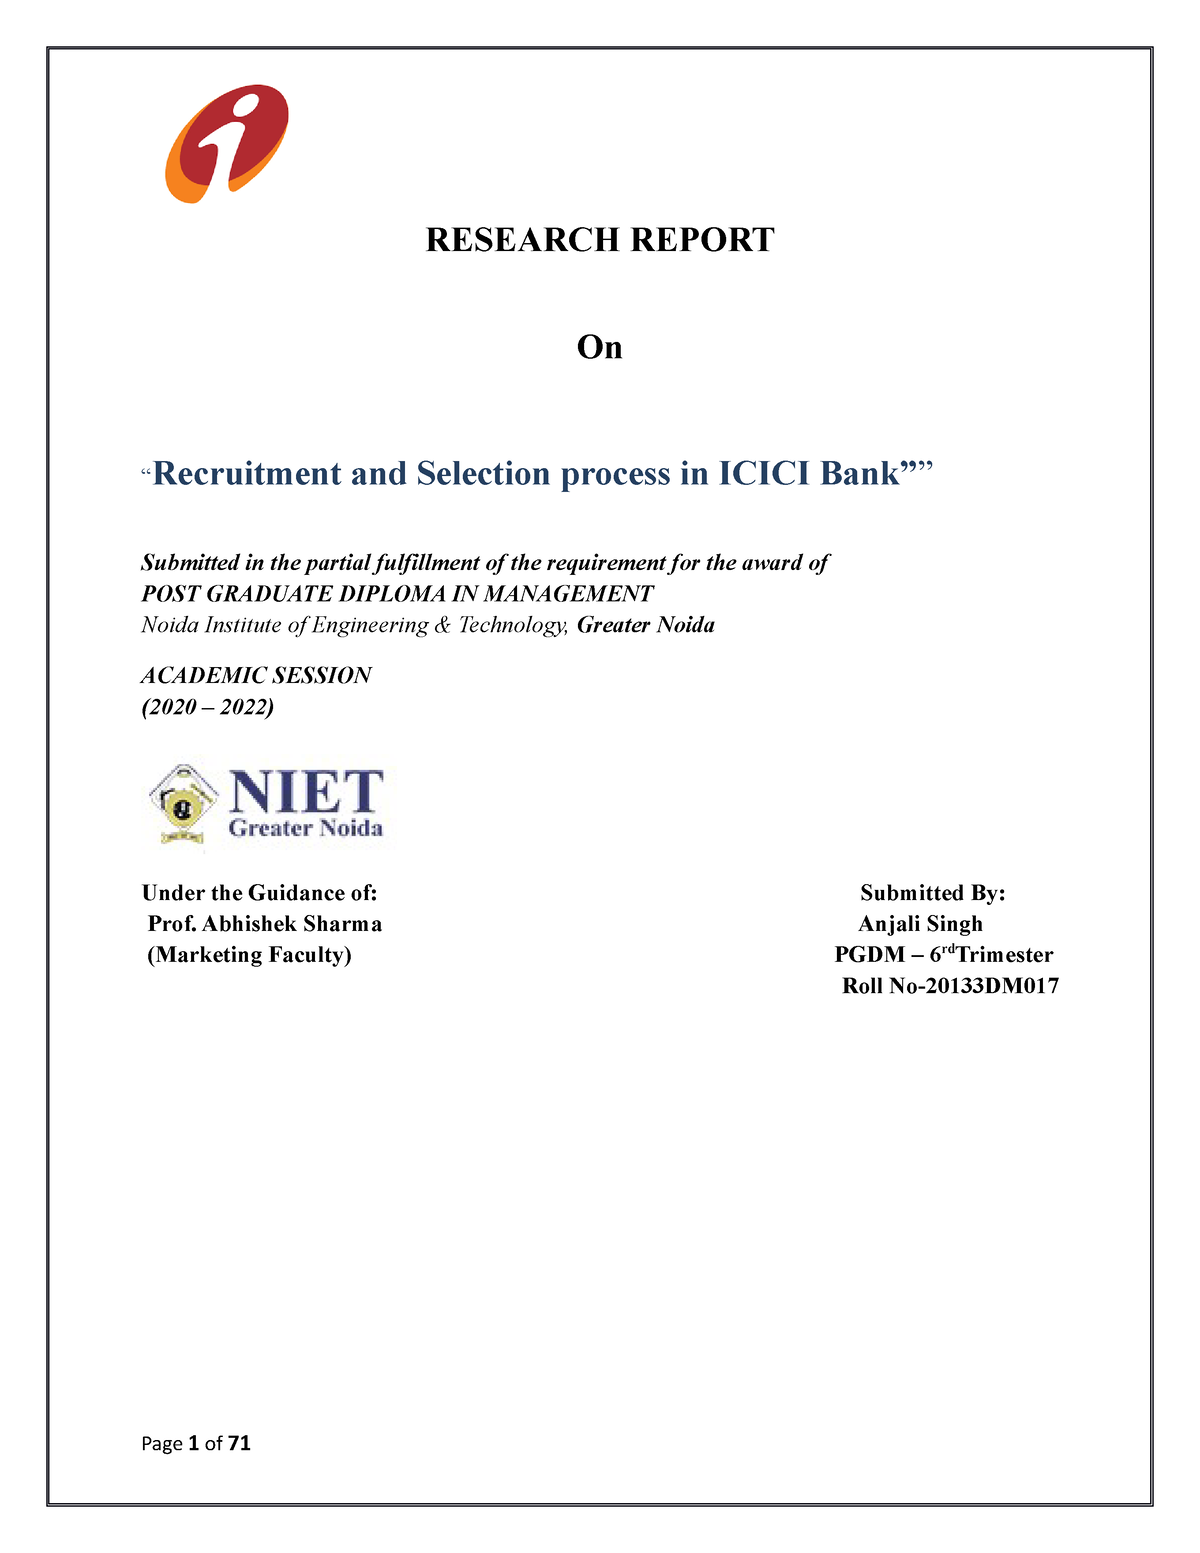 icici bank research report pdf